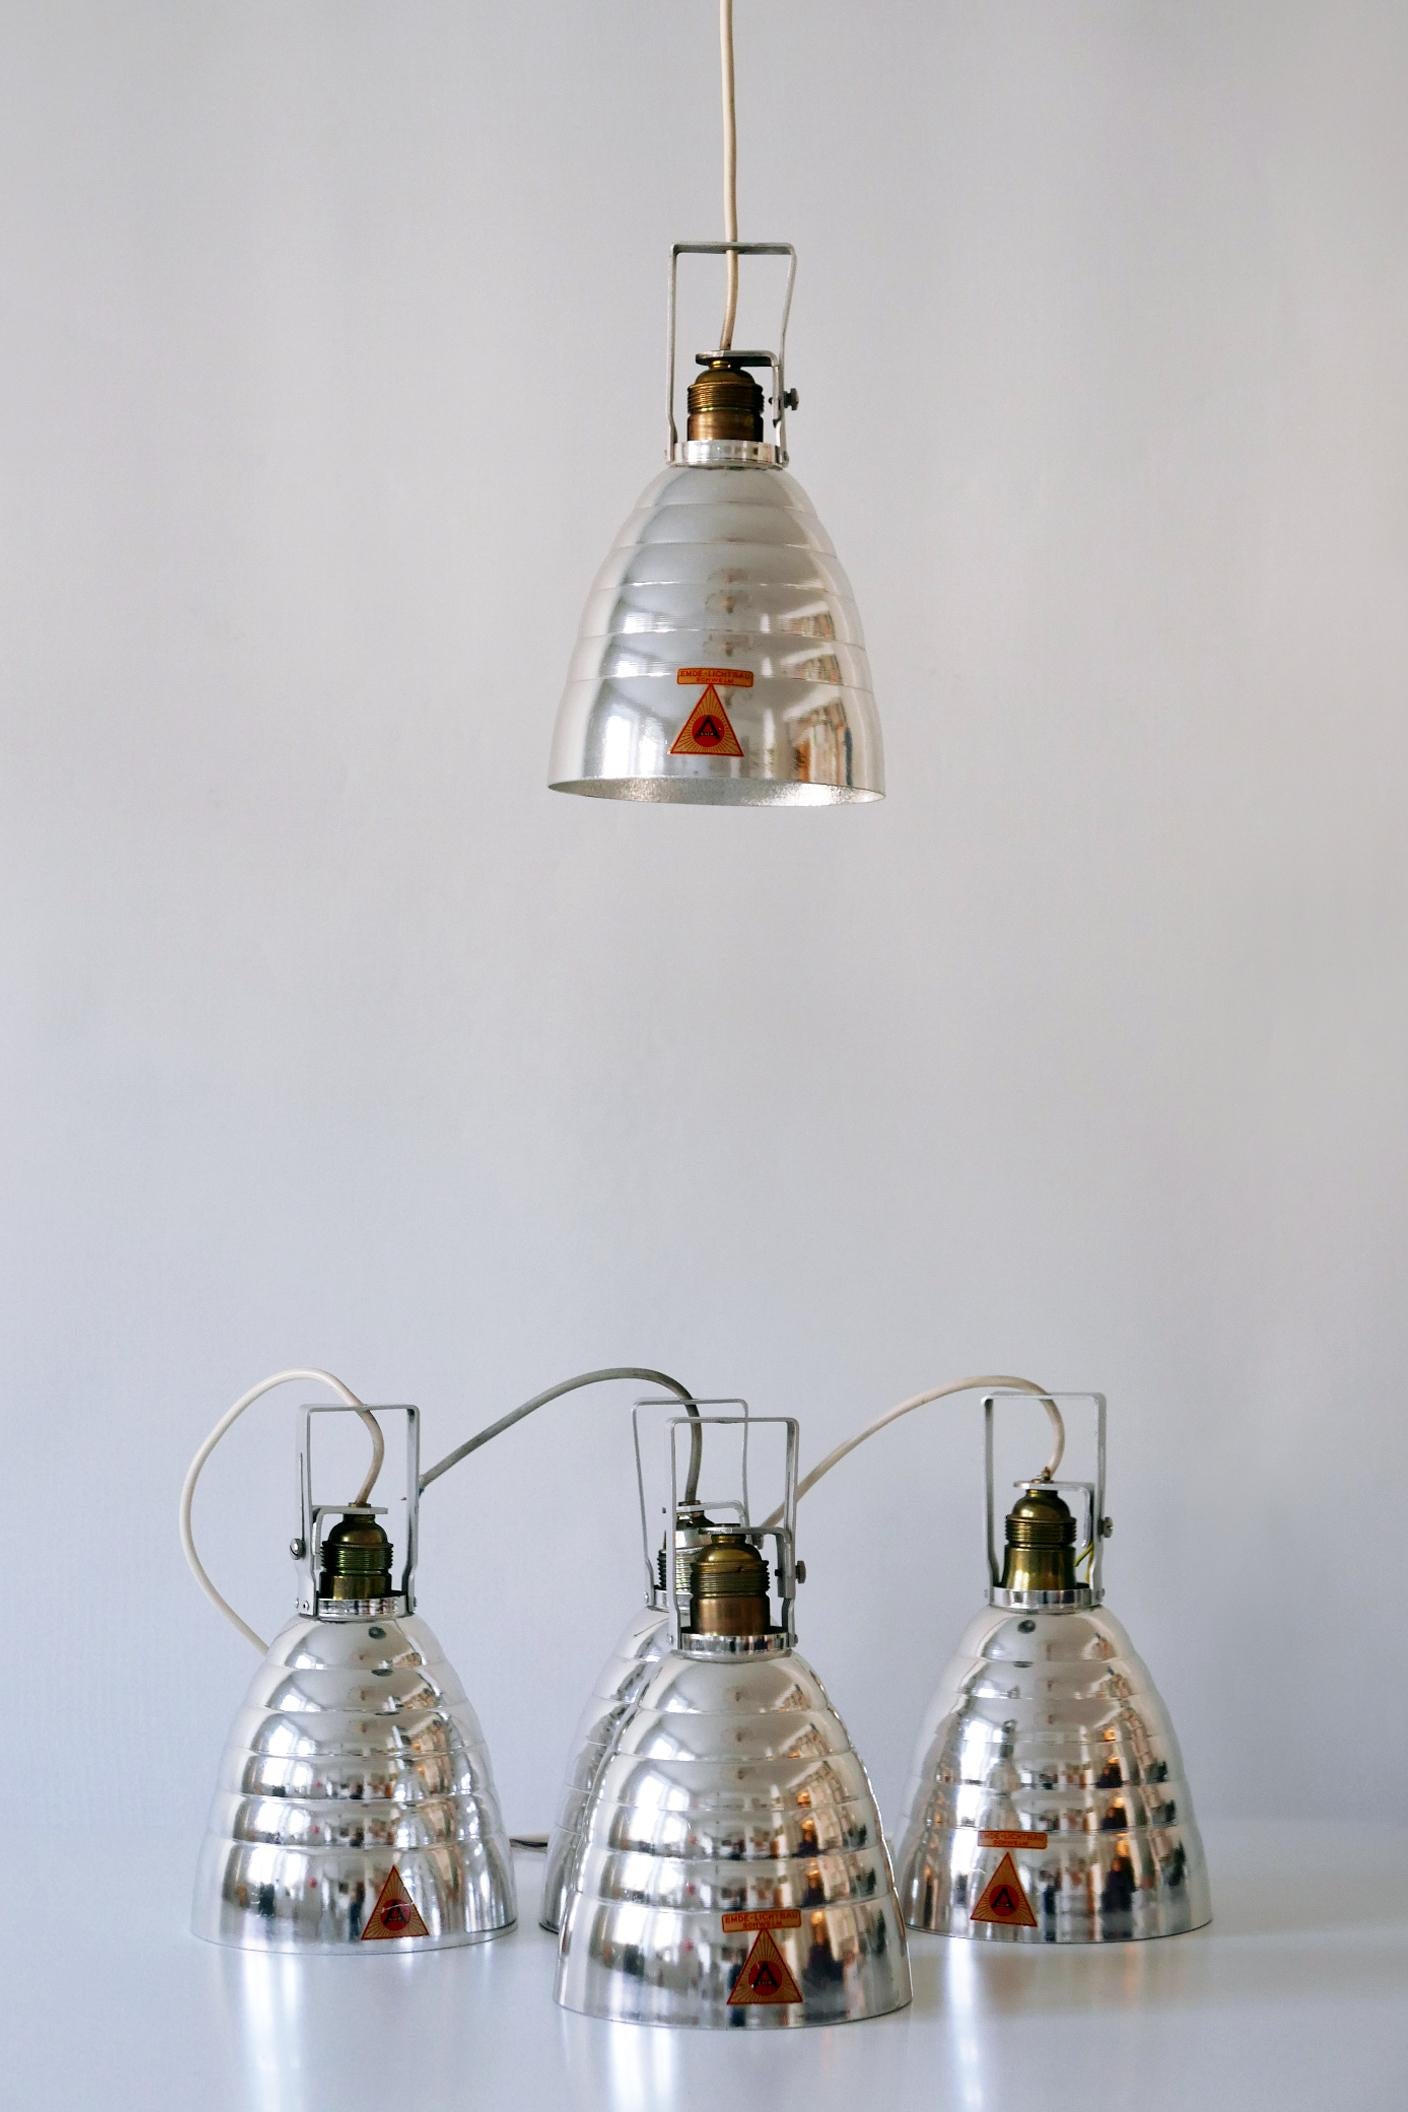 Elegant Mid-Century Modern glossy ceiling spot lights or pendant lamps by Alux, 1950s, Germany. 

Three identical lamps available!

Executed in glossy aluminium, each lamp comes with 1 x E27 / E26 Edison screw fit bulb holder, is wired and in